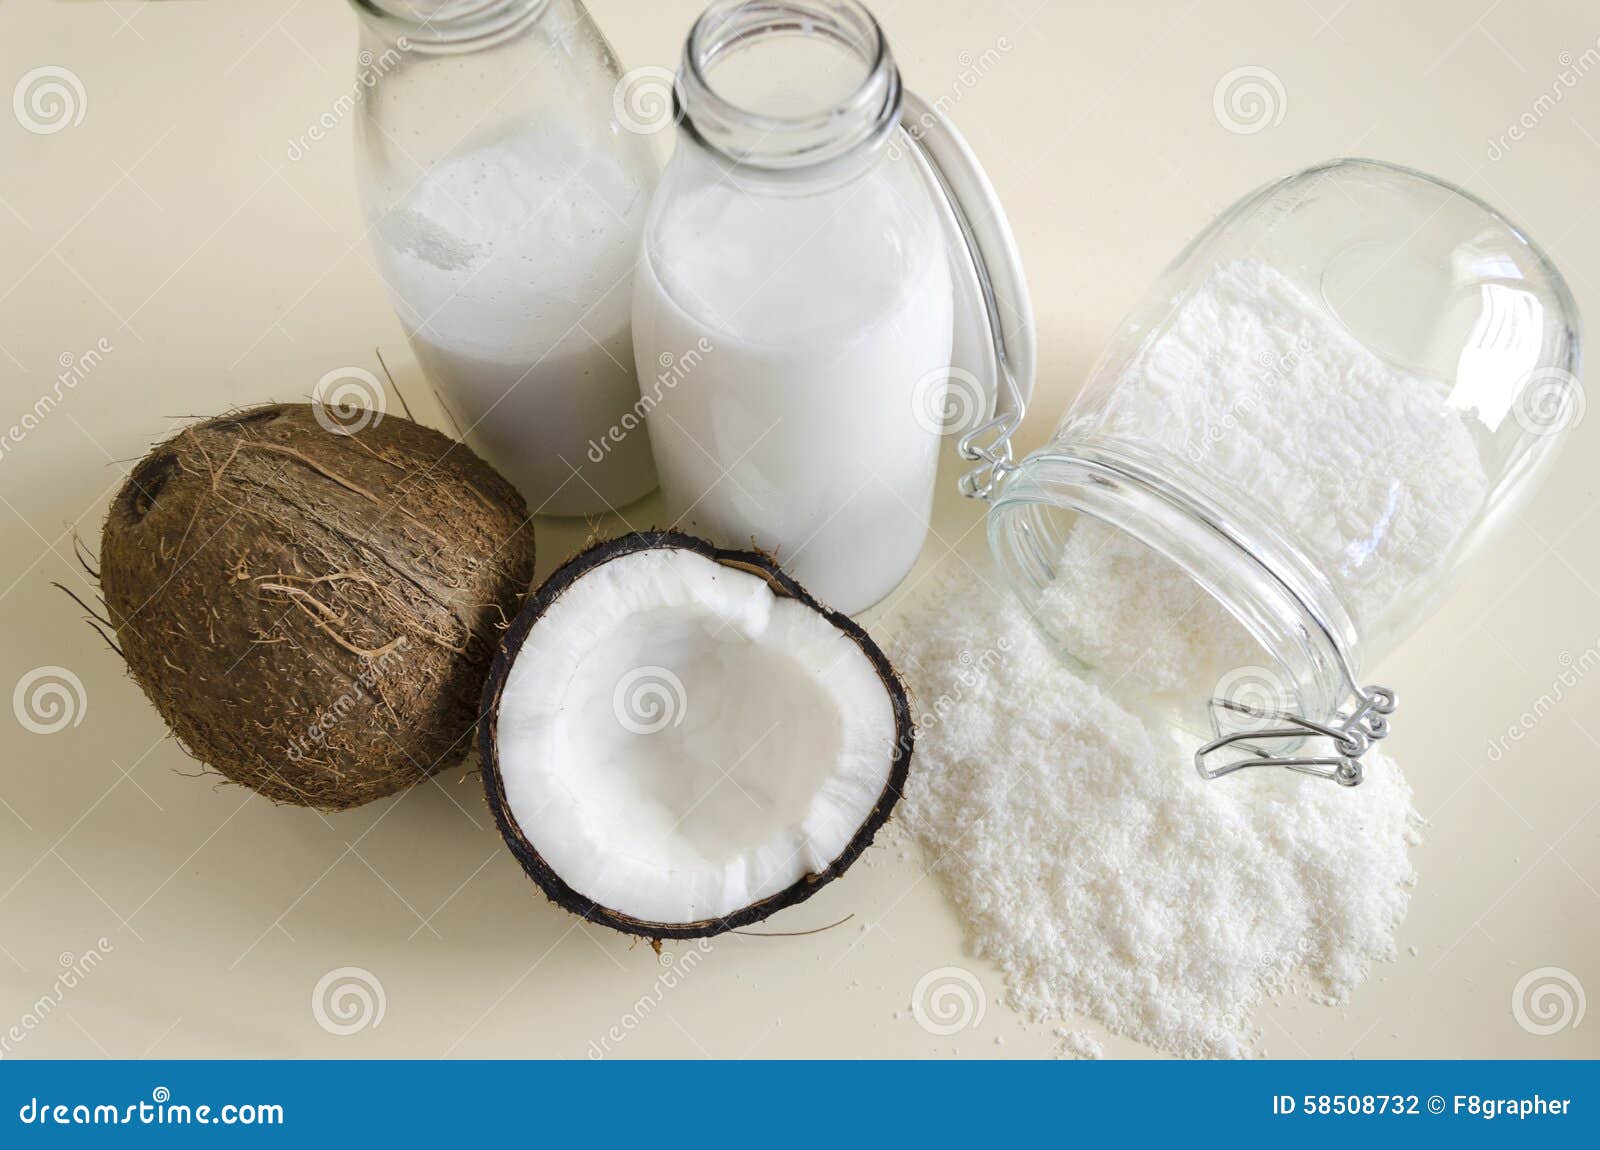 Coconut products. Cracked open coconut with meat cut in half, grounded flakes in a mason jar, flour and fresh milk in glass bottles on a table with red ruby background.